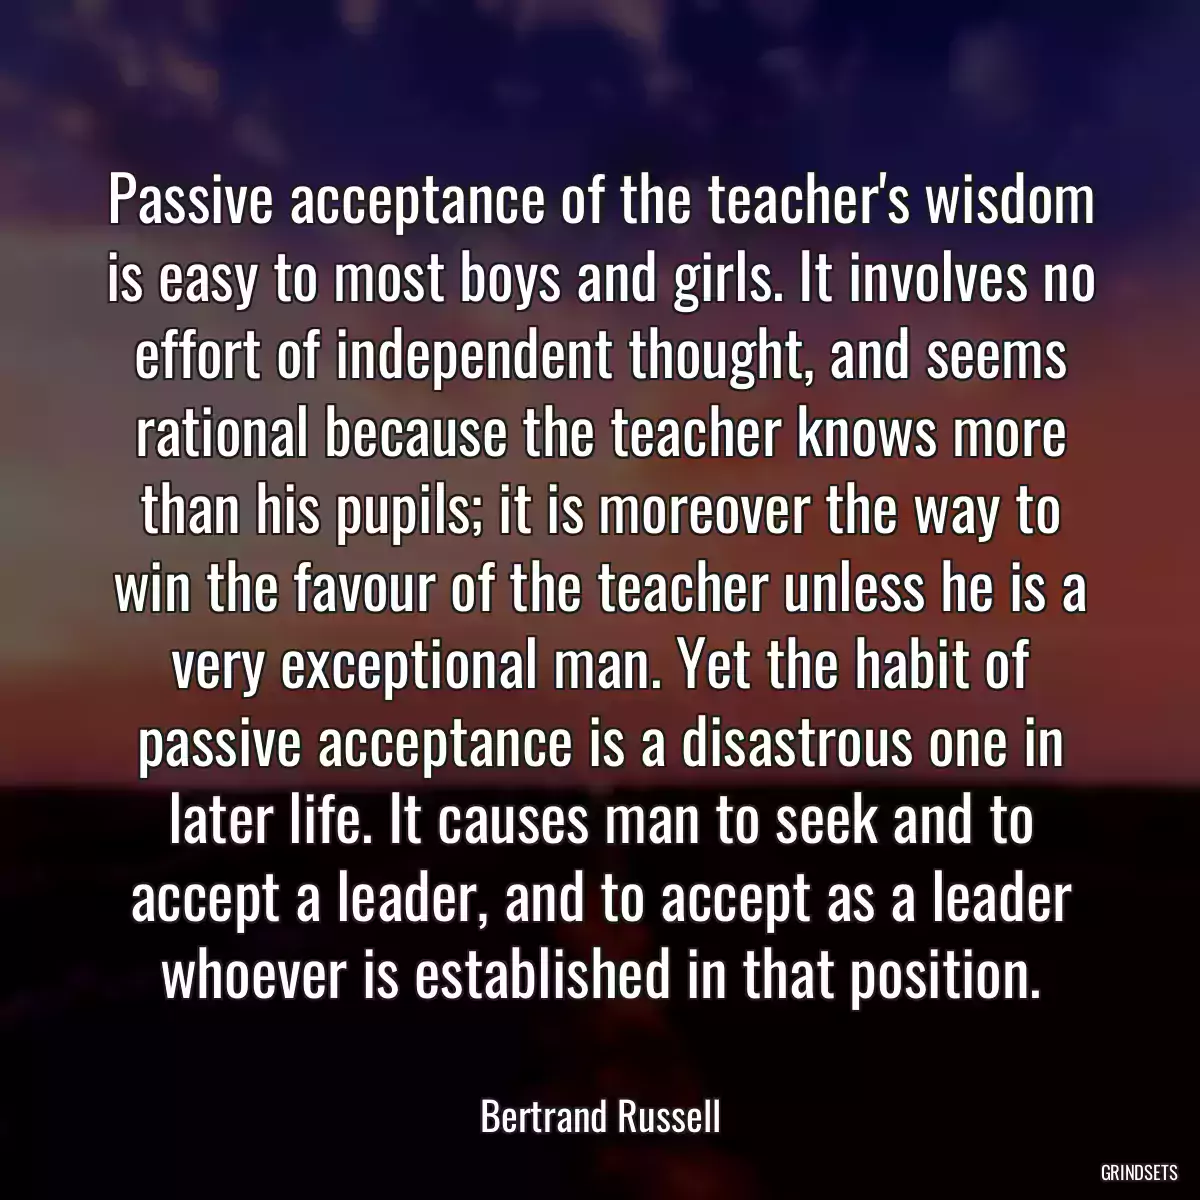 Passive acceptance of the teacher\'s wisdom is easy to most boys and girls. It involves no effort of independent thought, and seems rational because the teacher knows more than his pupils; it is moreover the way to win the favour of the teacher unless he is a very exceptional man. Yet the habit of passive acceptance is a disastrous one in later life. It causes man to seek and to accept a leader, and to accept as a leader whoever is established in that position.